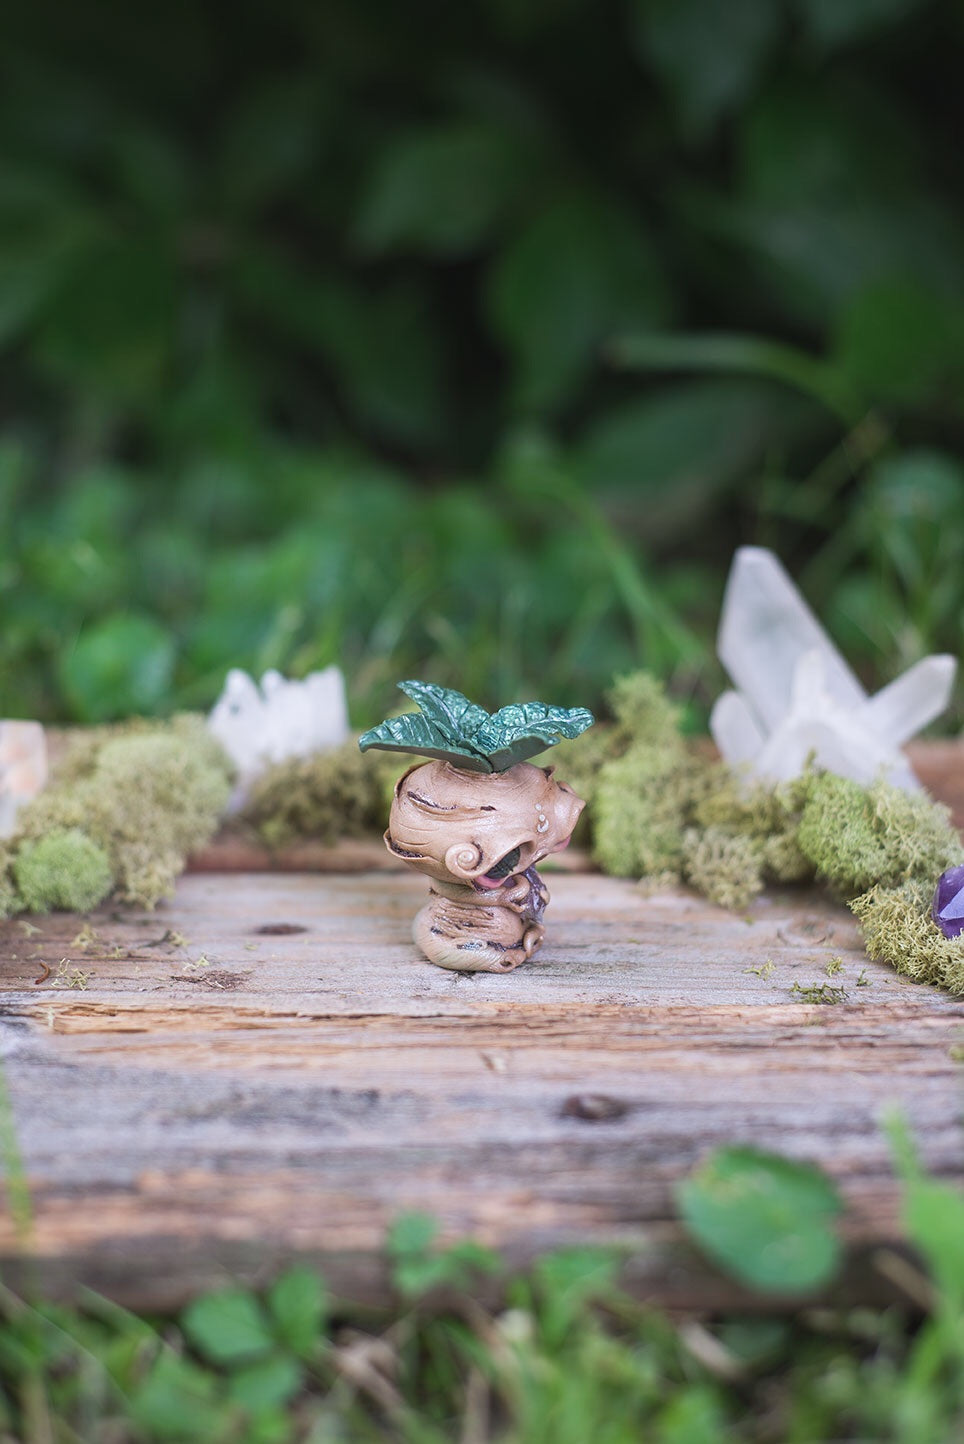 Right-Side View of Beige Mandrake Mish - handmade polymer clay mandragora root creature with holding fluorite